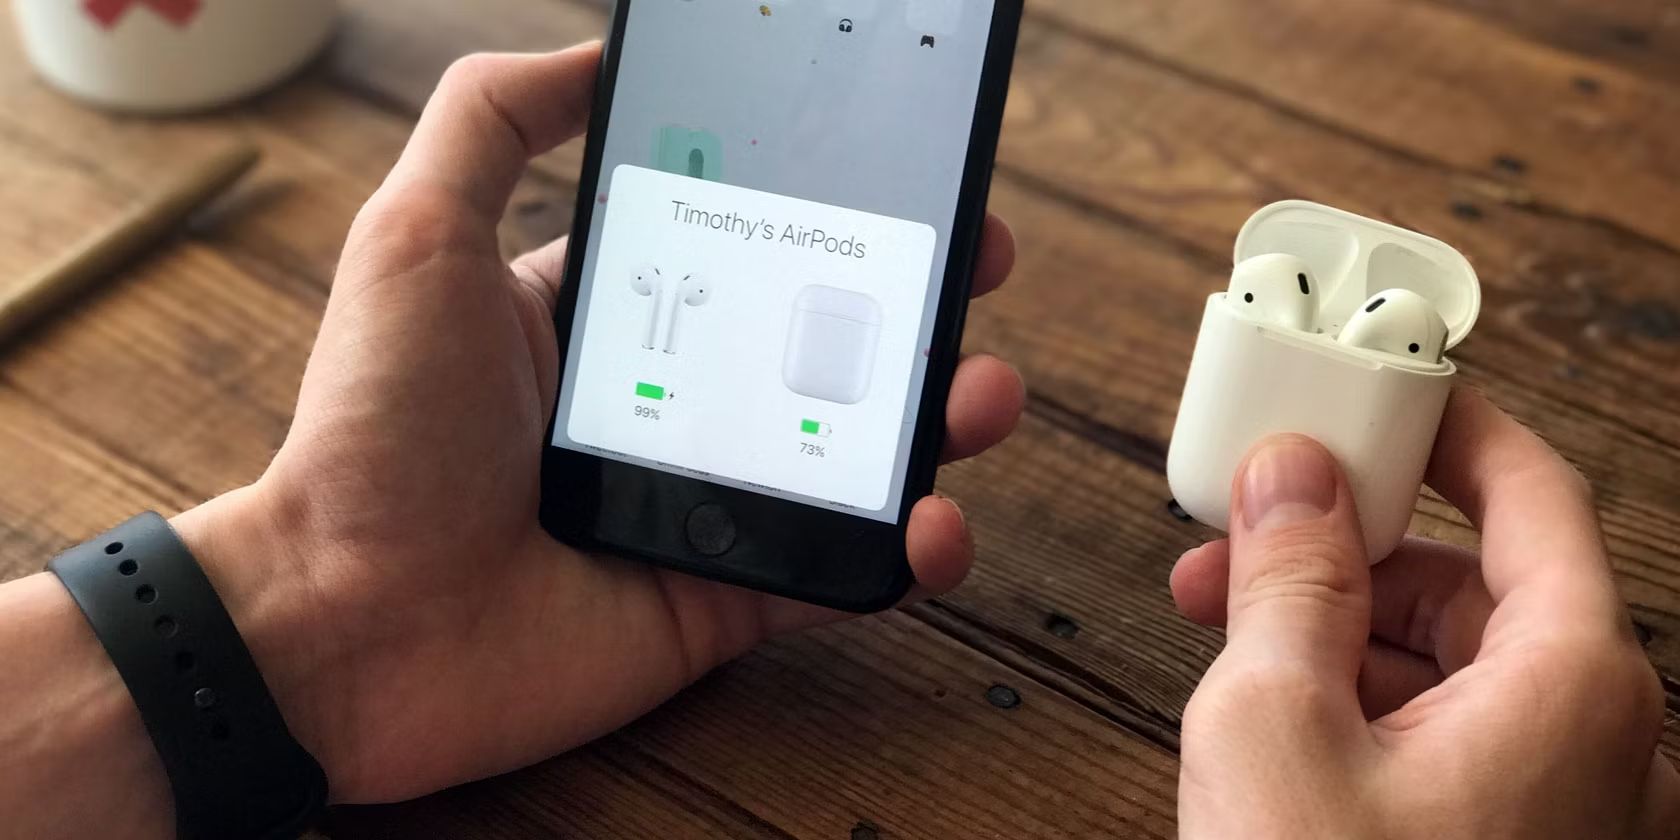 What To Do If My AirPods Won’t Connect